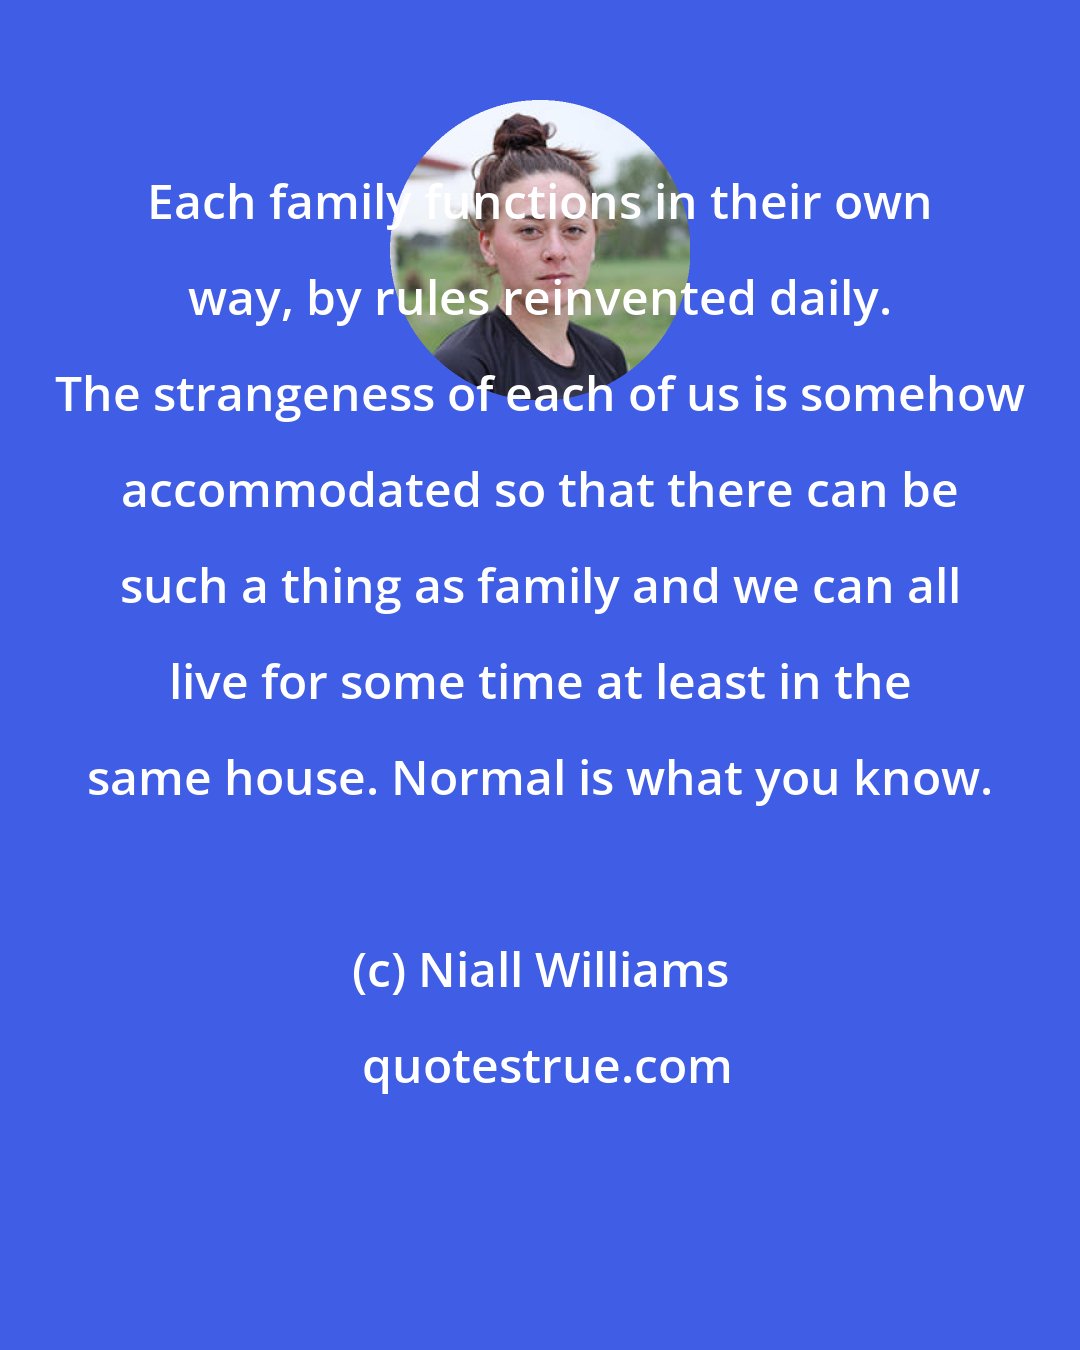 Niall Williams: Each family functions in their own way, by rules reinvented daily. The strangeness of each of us is somehow accommodated so that there can be such a thing as family and we can all live for some time at least in the same house. Normal is what you know.